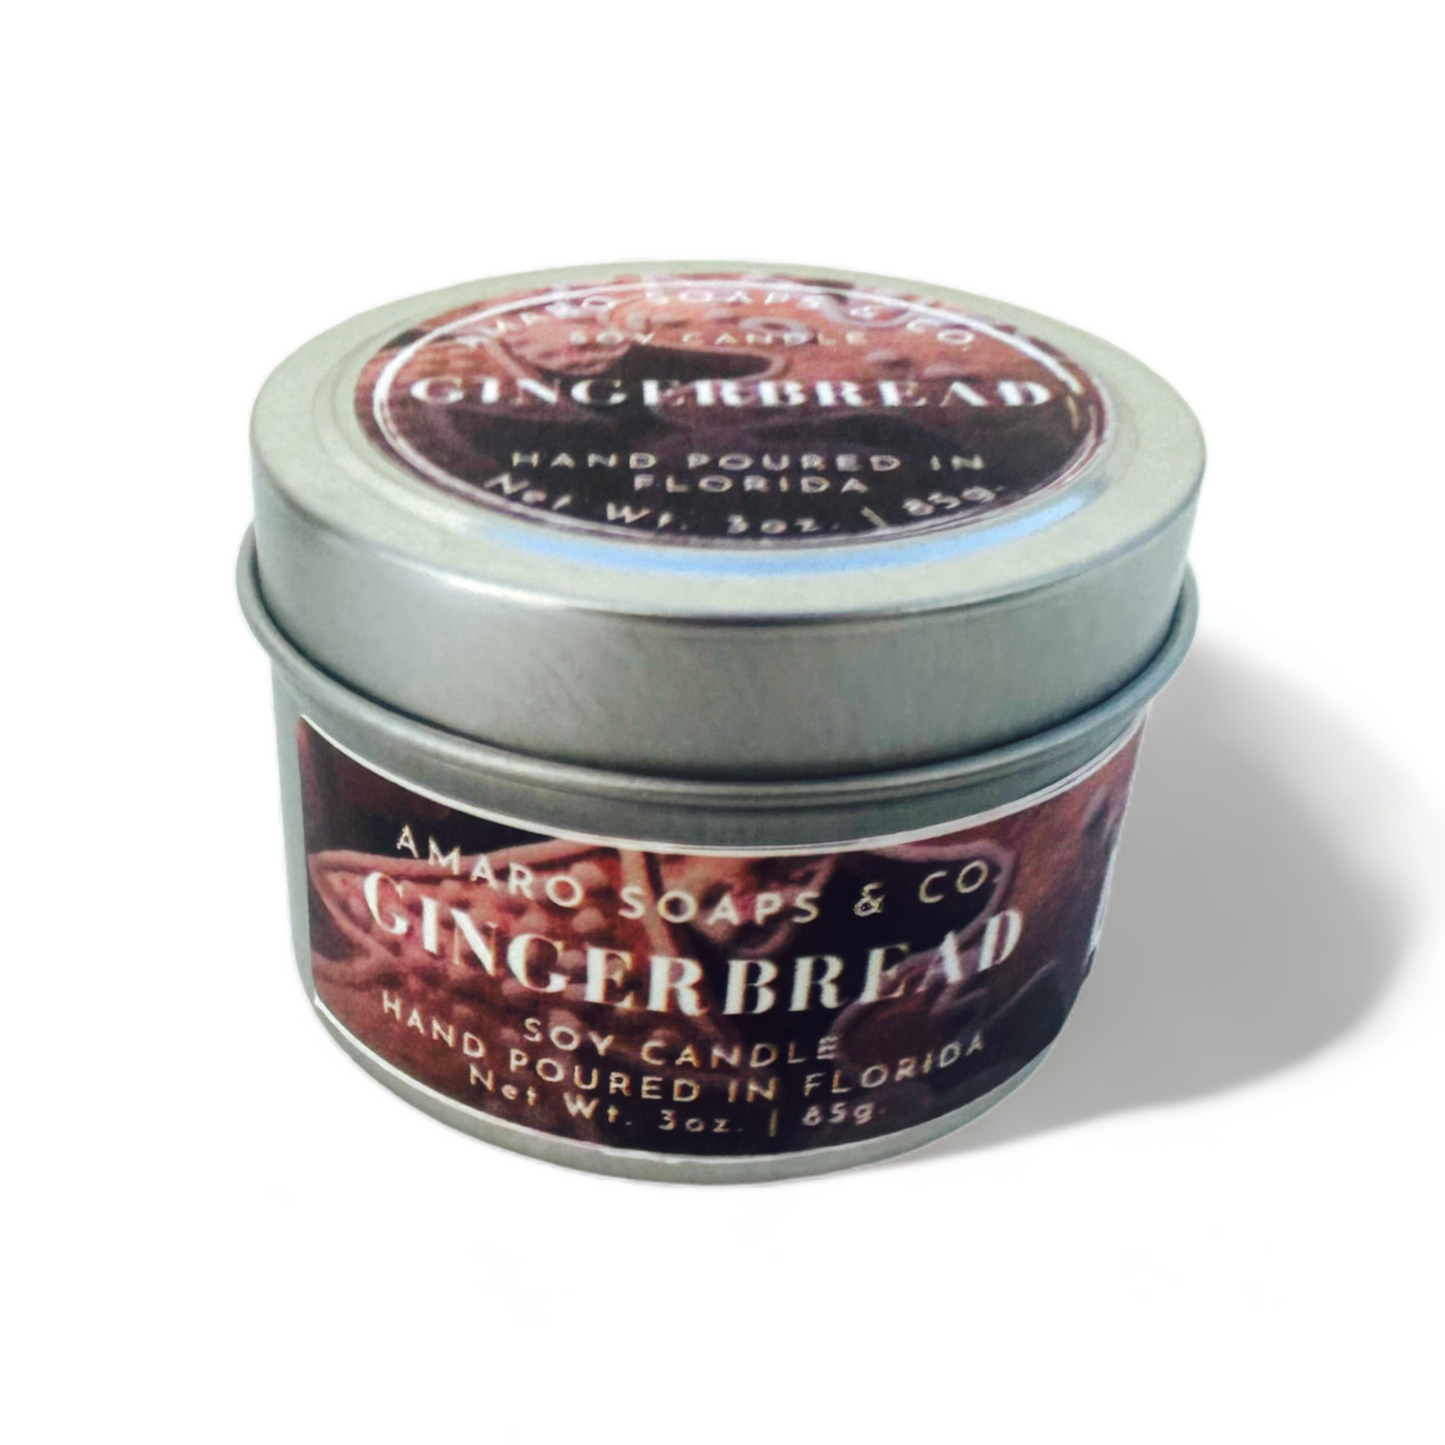 Gingerbread Soy Candle Tin